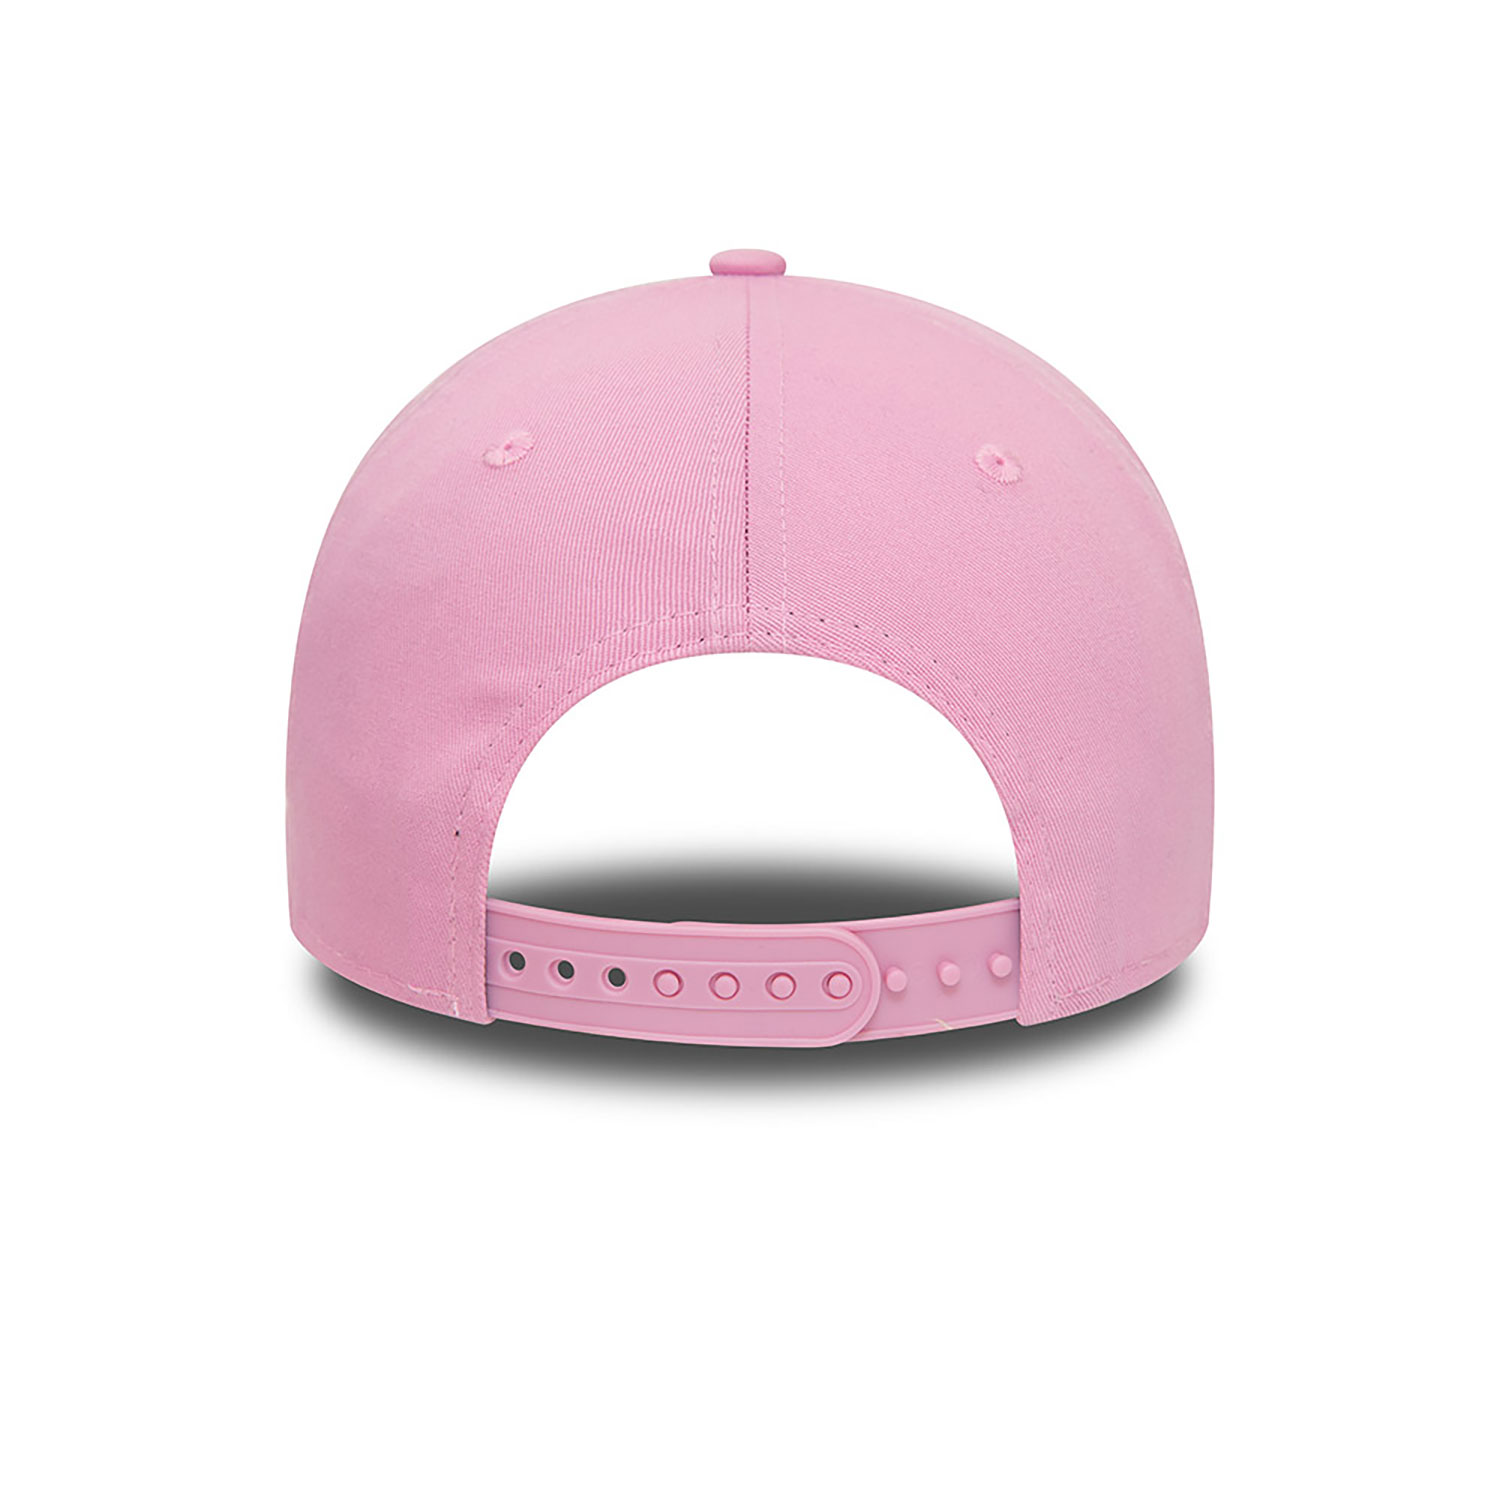 New York Yankees MLB Flawless Pink 9FORTY Adjustable Cap